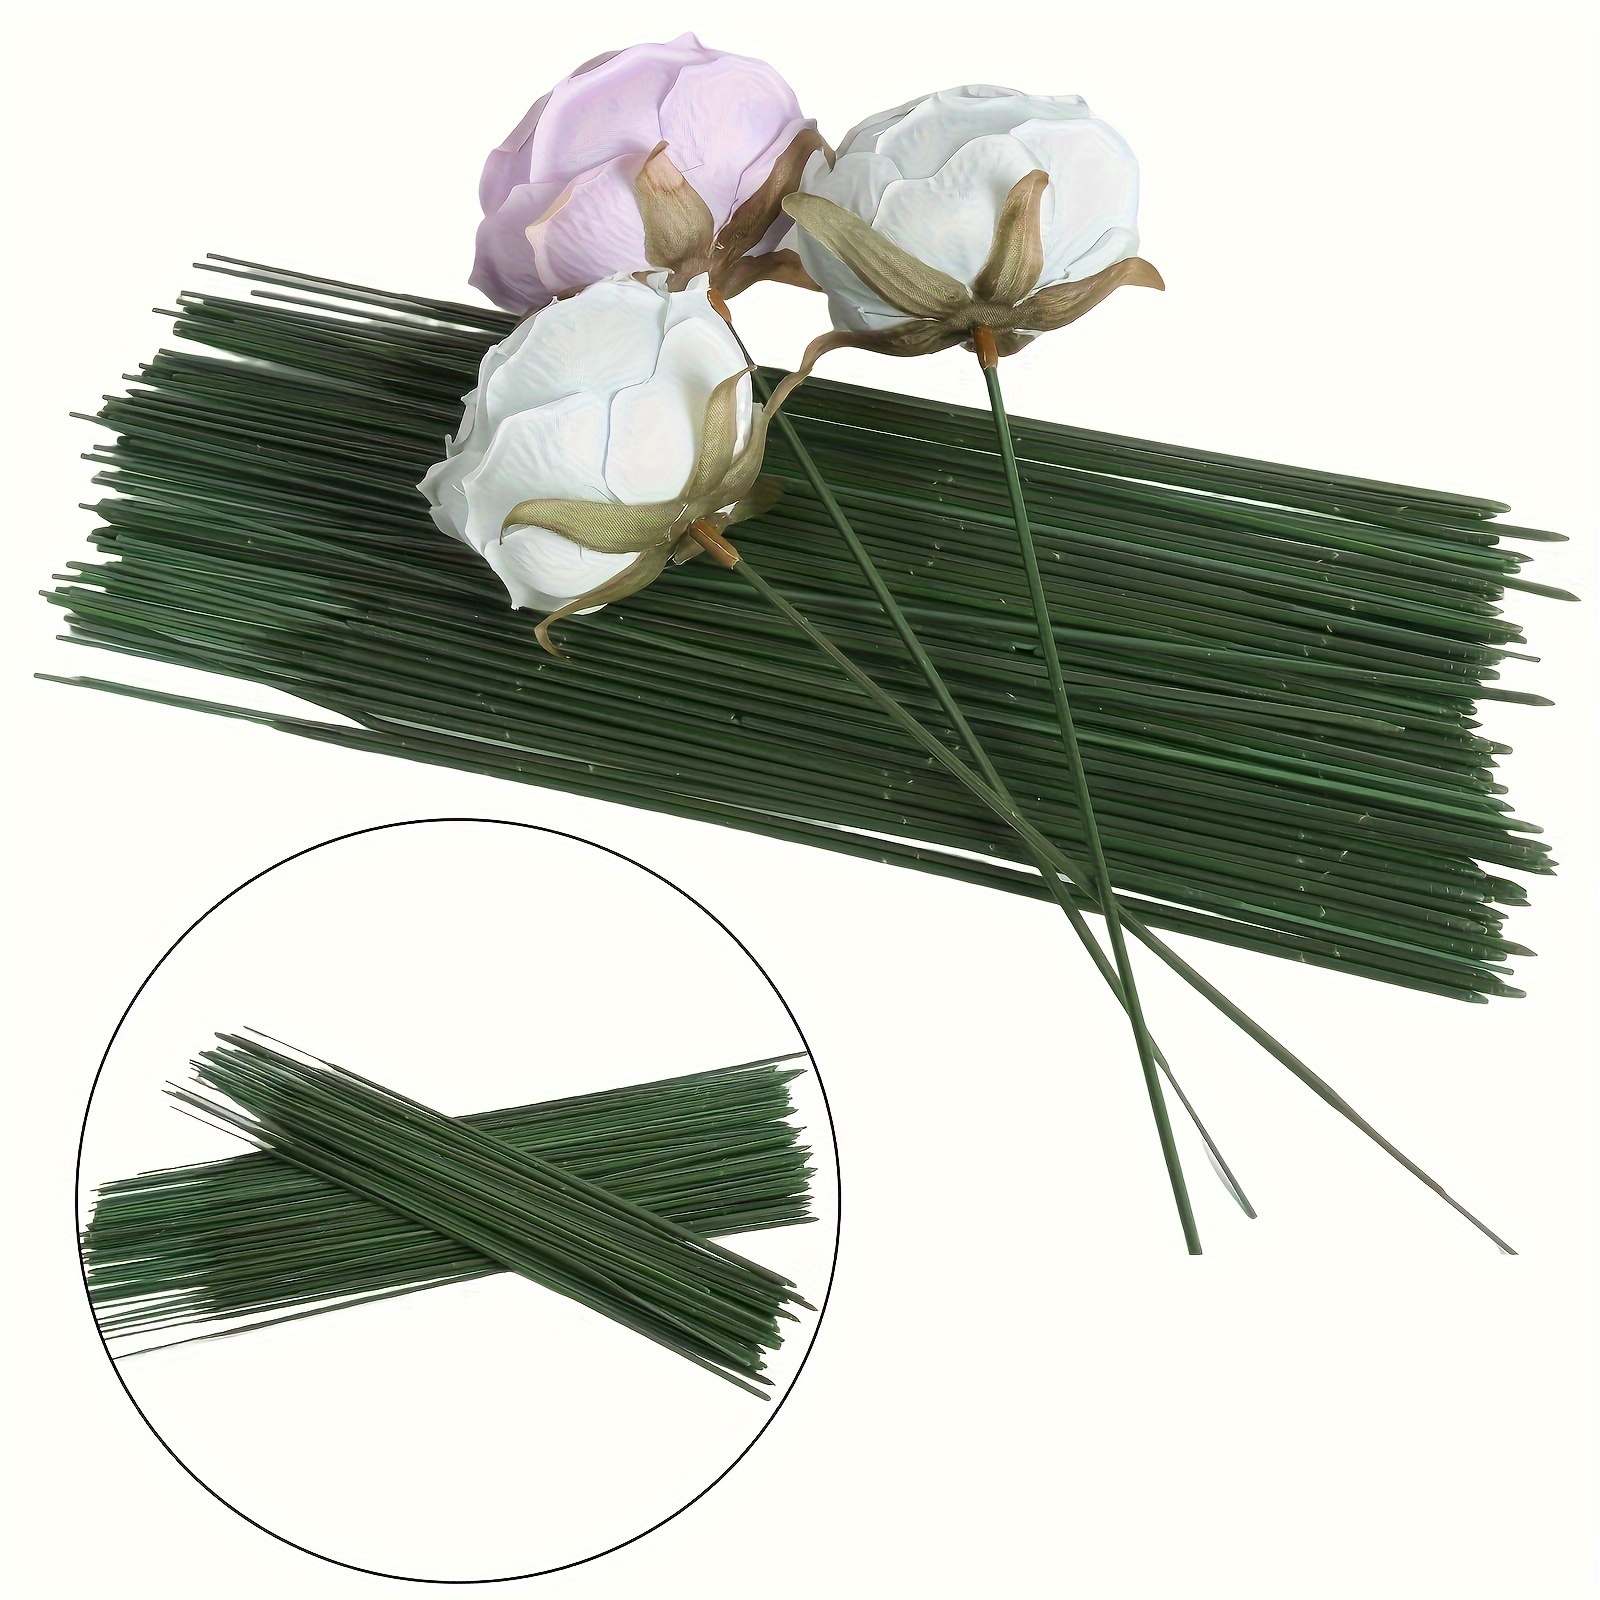 

100pcs Artificial Flower Stems Flexible Bendable Iron Wire Sticks For Diy Floral Arrangements, Wedding Bouquets, And Craft Projects - Plastic Material